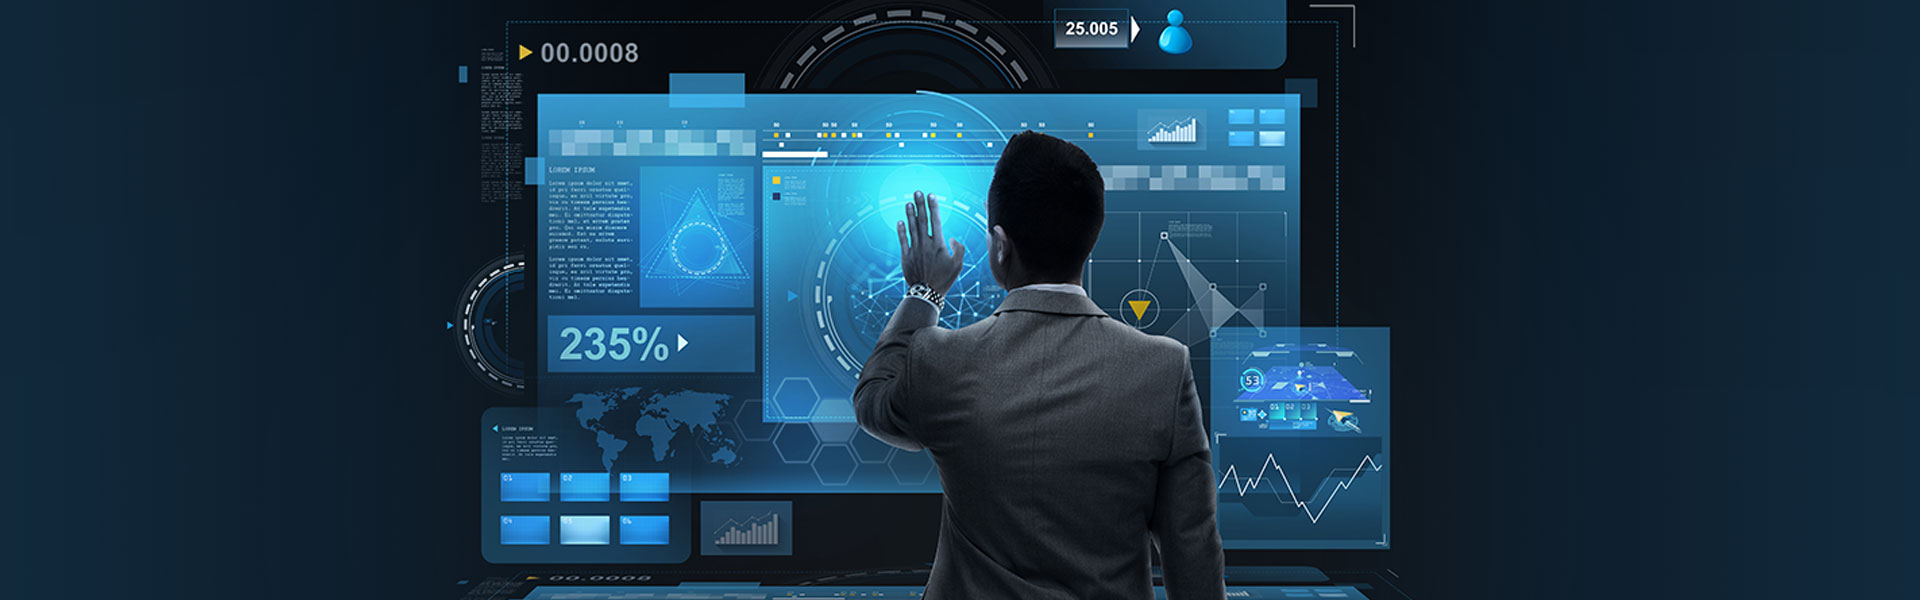 Why Big Data Analytics should be a part of your Digital Transformation Journey